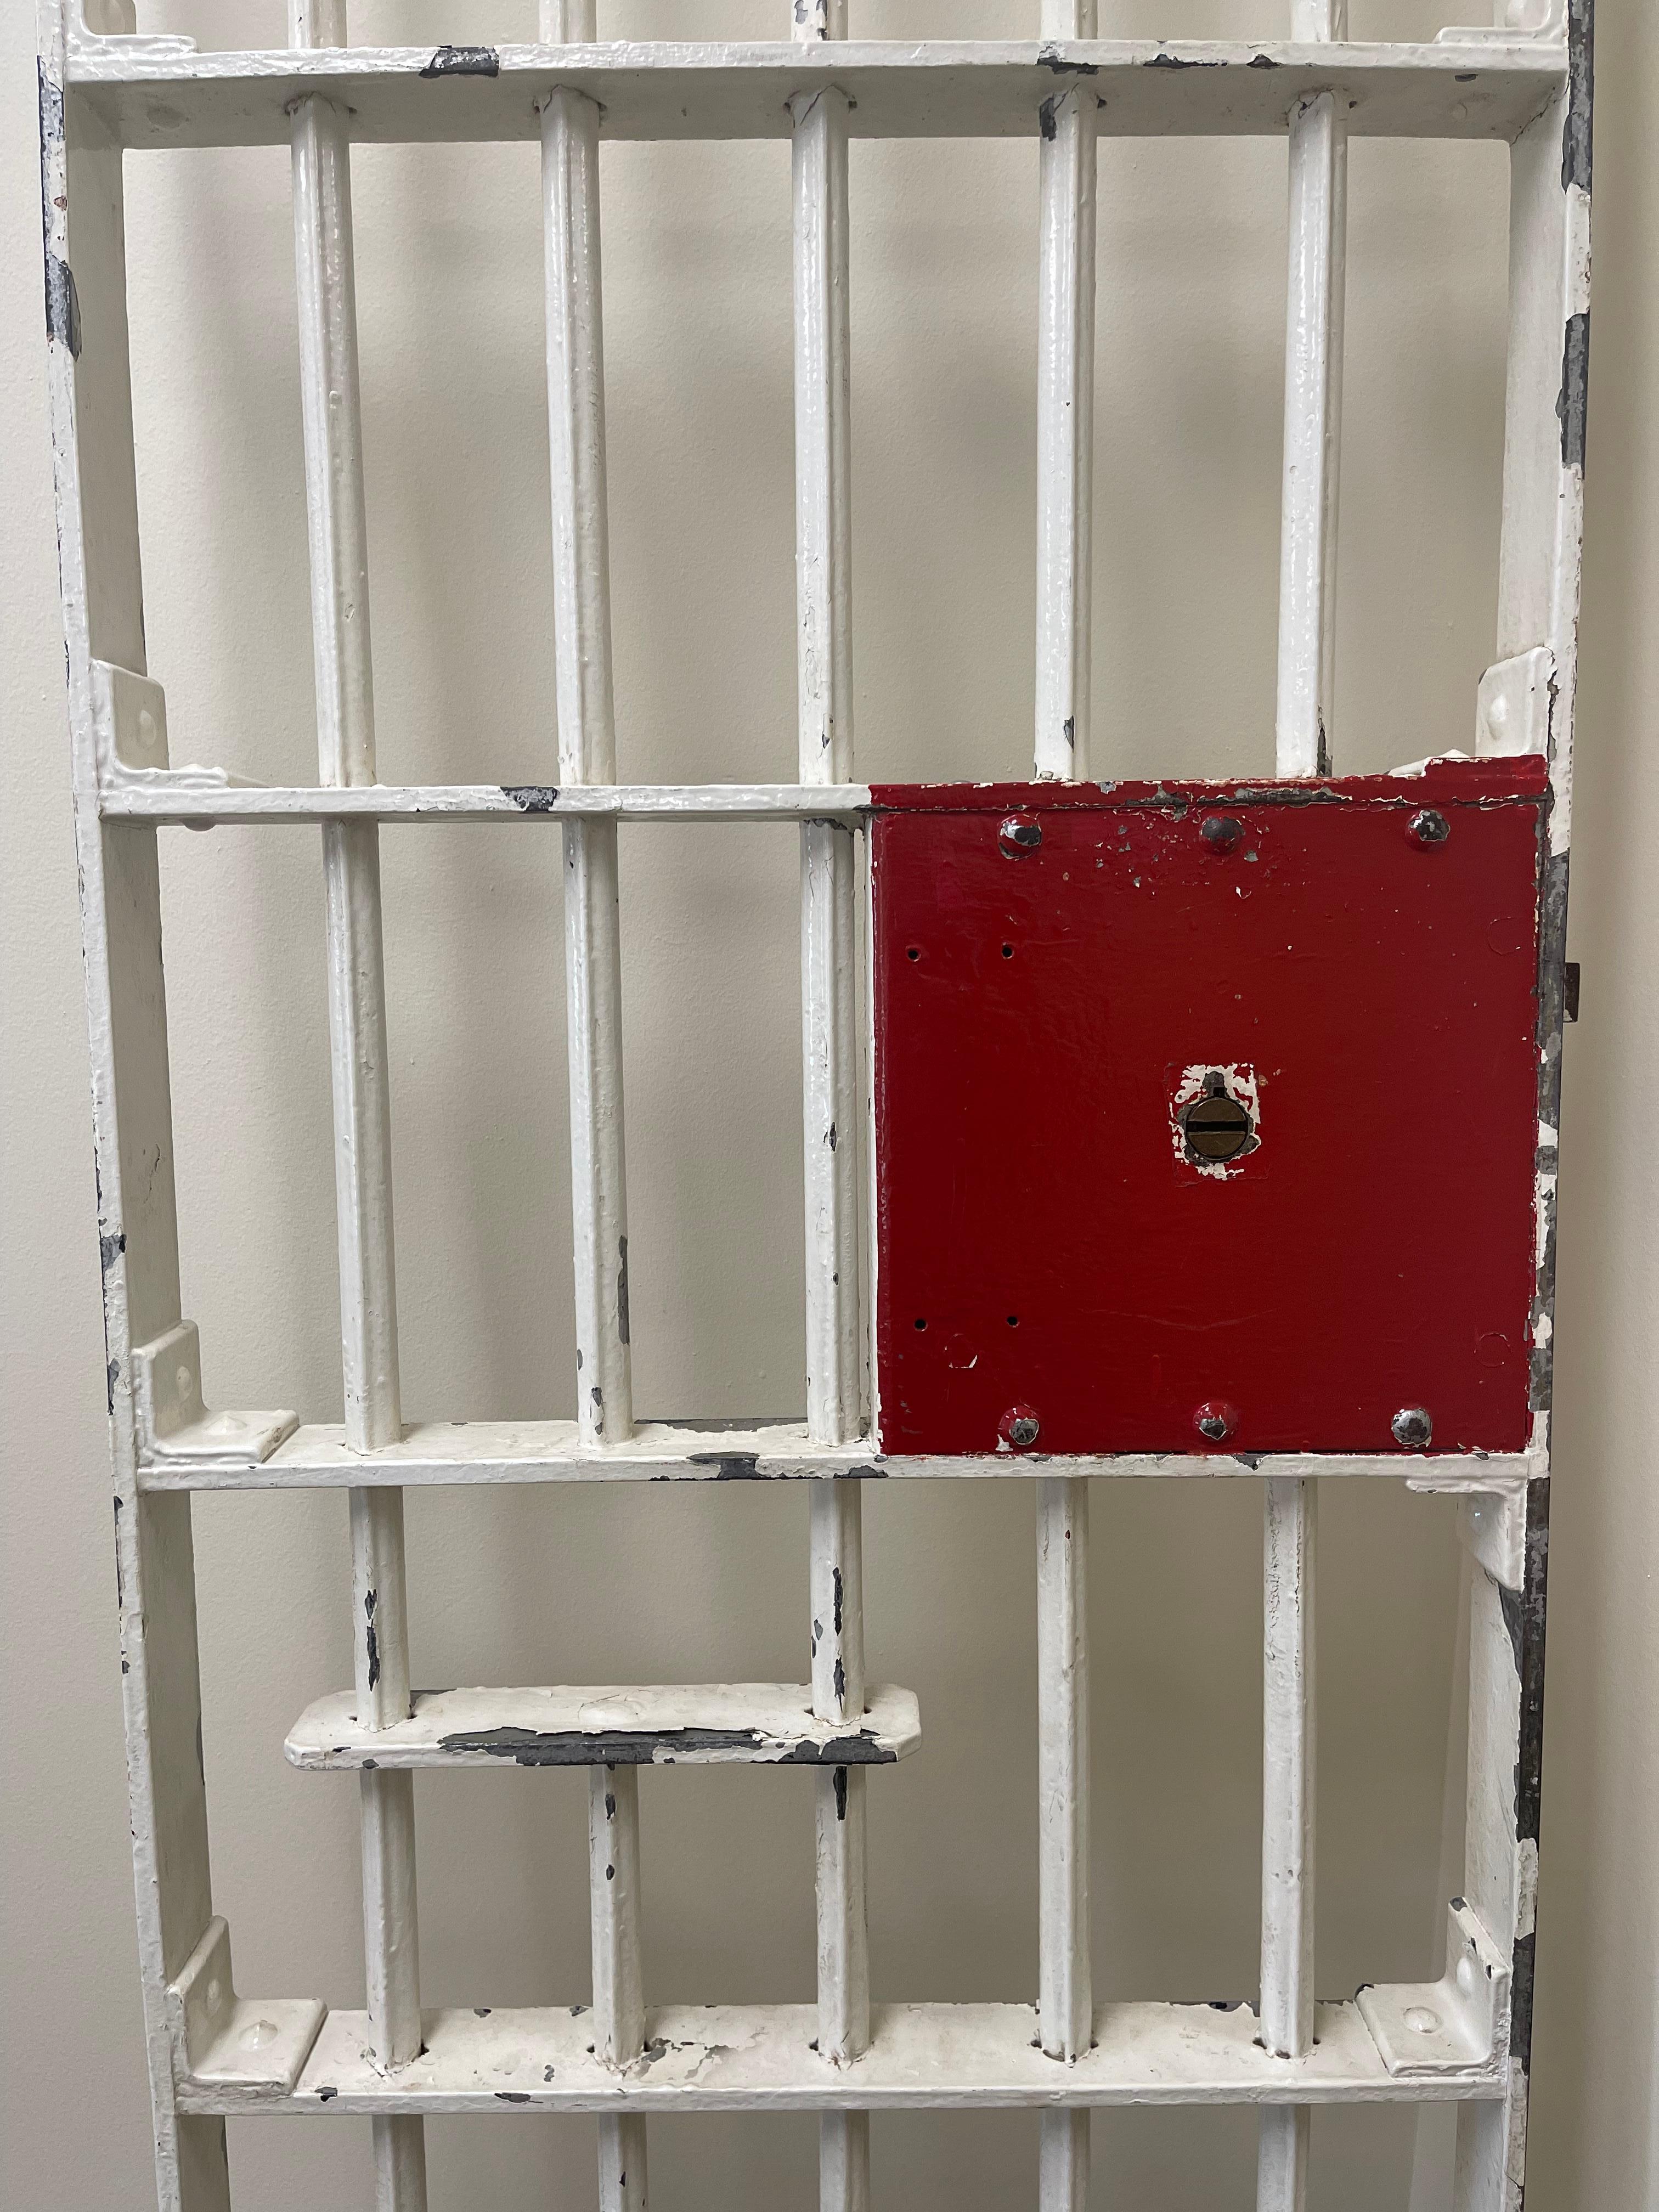 An authentic relic from an Ohio jail makes an imaginative architectural element. Original chippy paint with bright red area around the lock. On casters.
Very heavy!